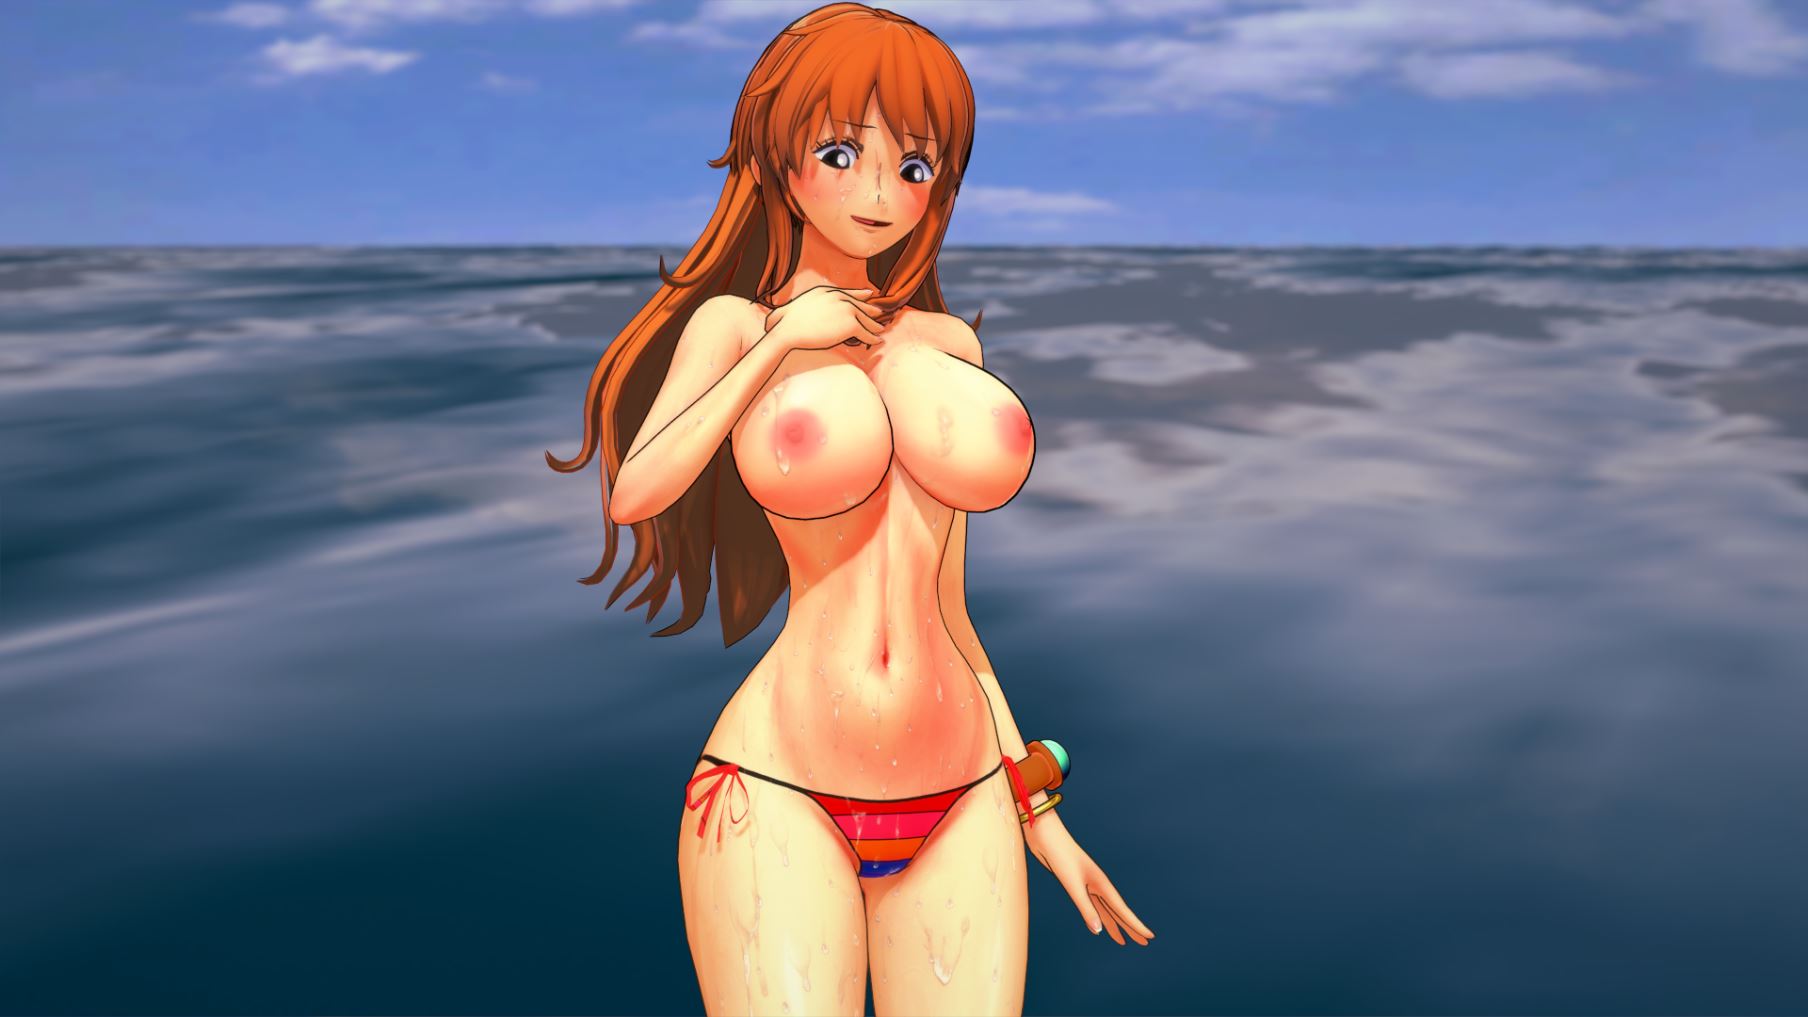 Sea Xxxn Com - One Piece: Lost at Sea Ren'Py Porn Sex Game v.0.1a Download for Windows,  MacOS, Linux